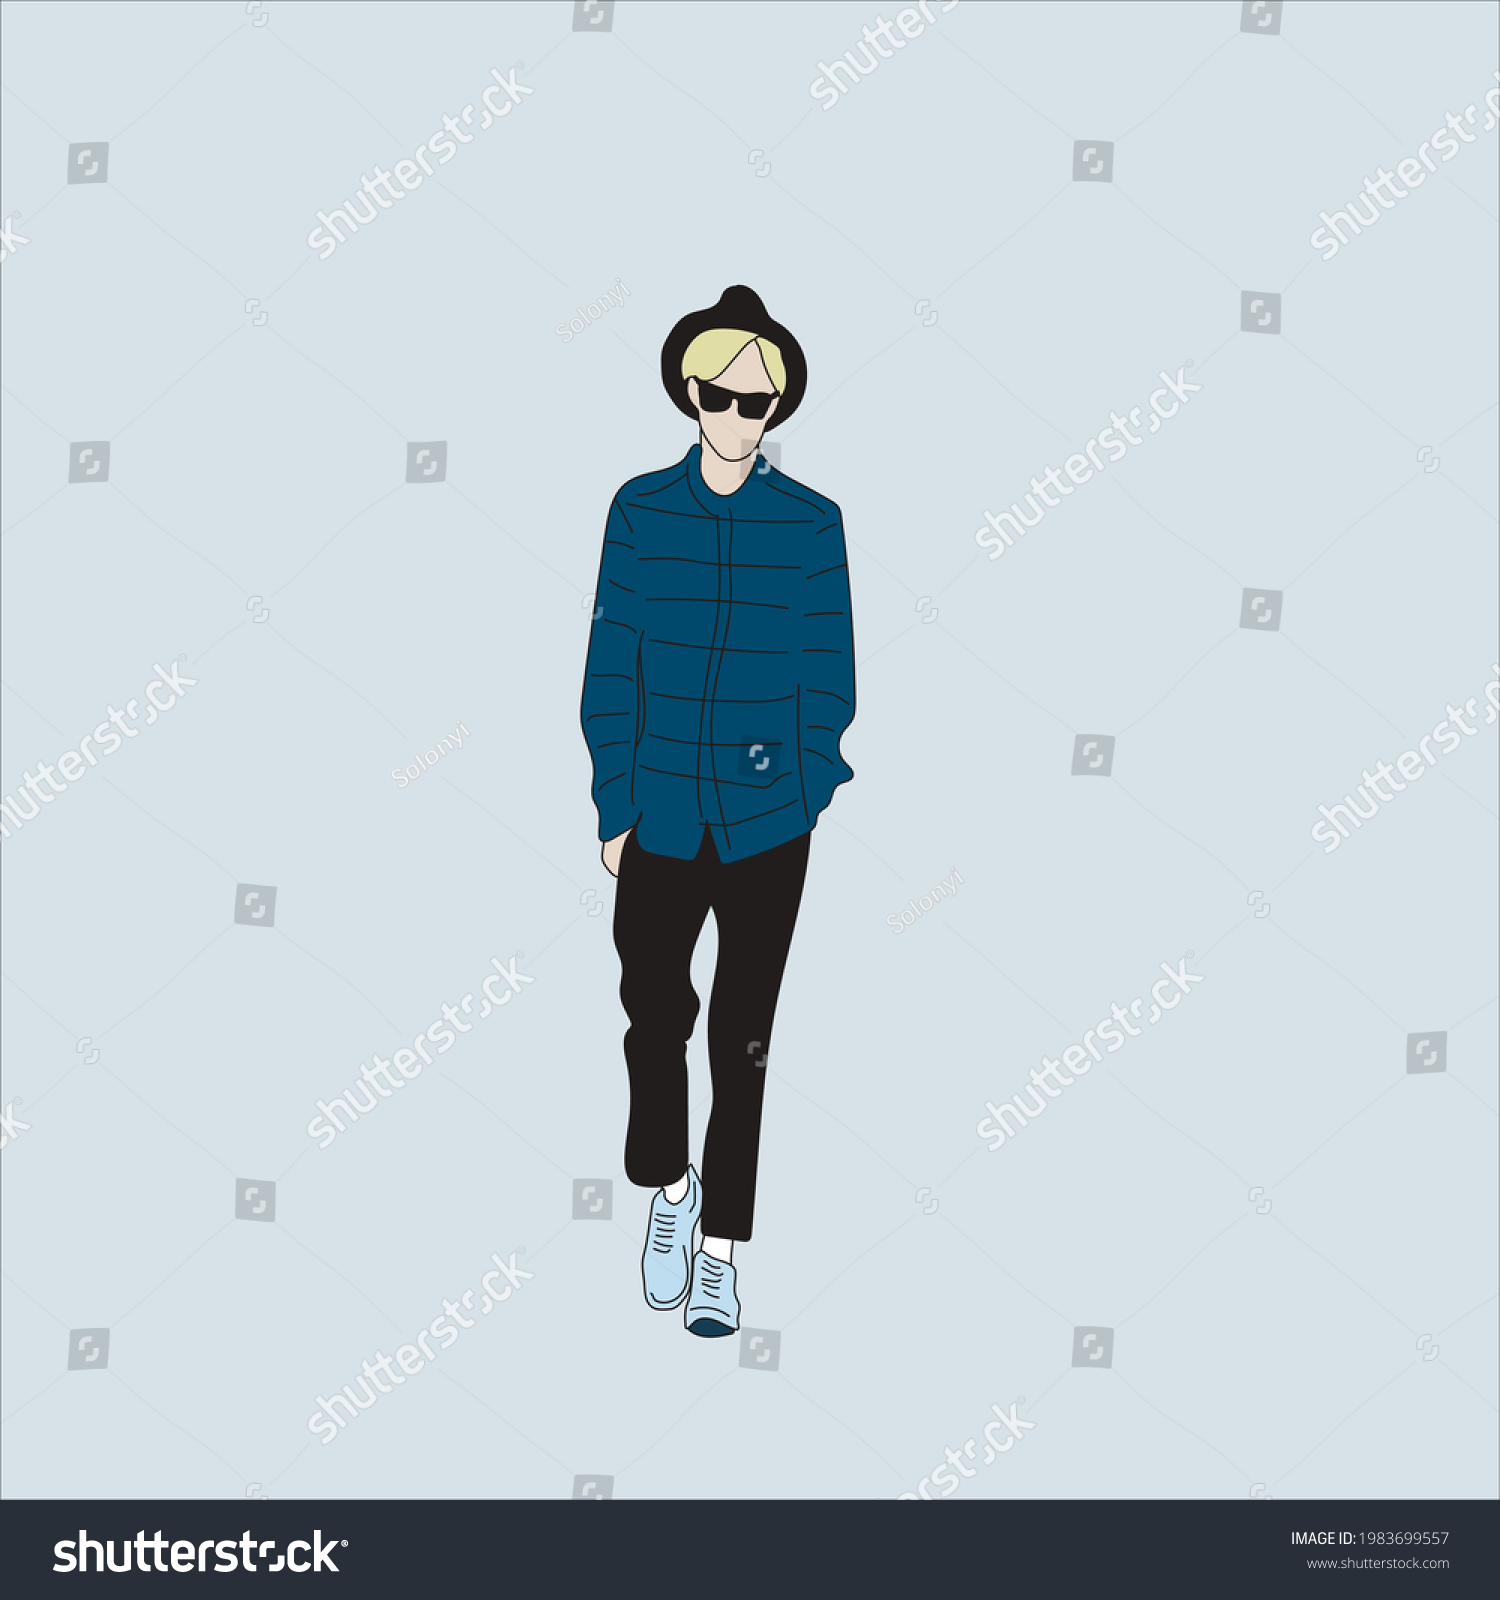 SVG of Vector illustration of Kpop street fashion. Street idols of Koreans. Kpop men's fashion idol. A guy in a blue shirt and black pants. svg